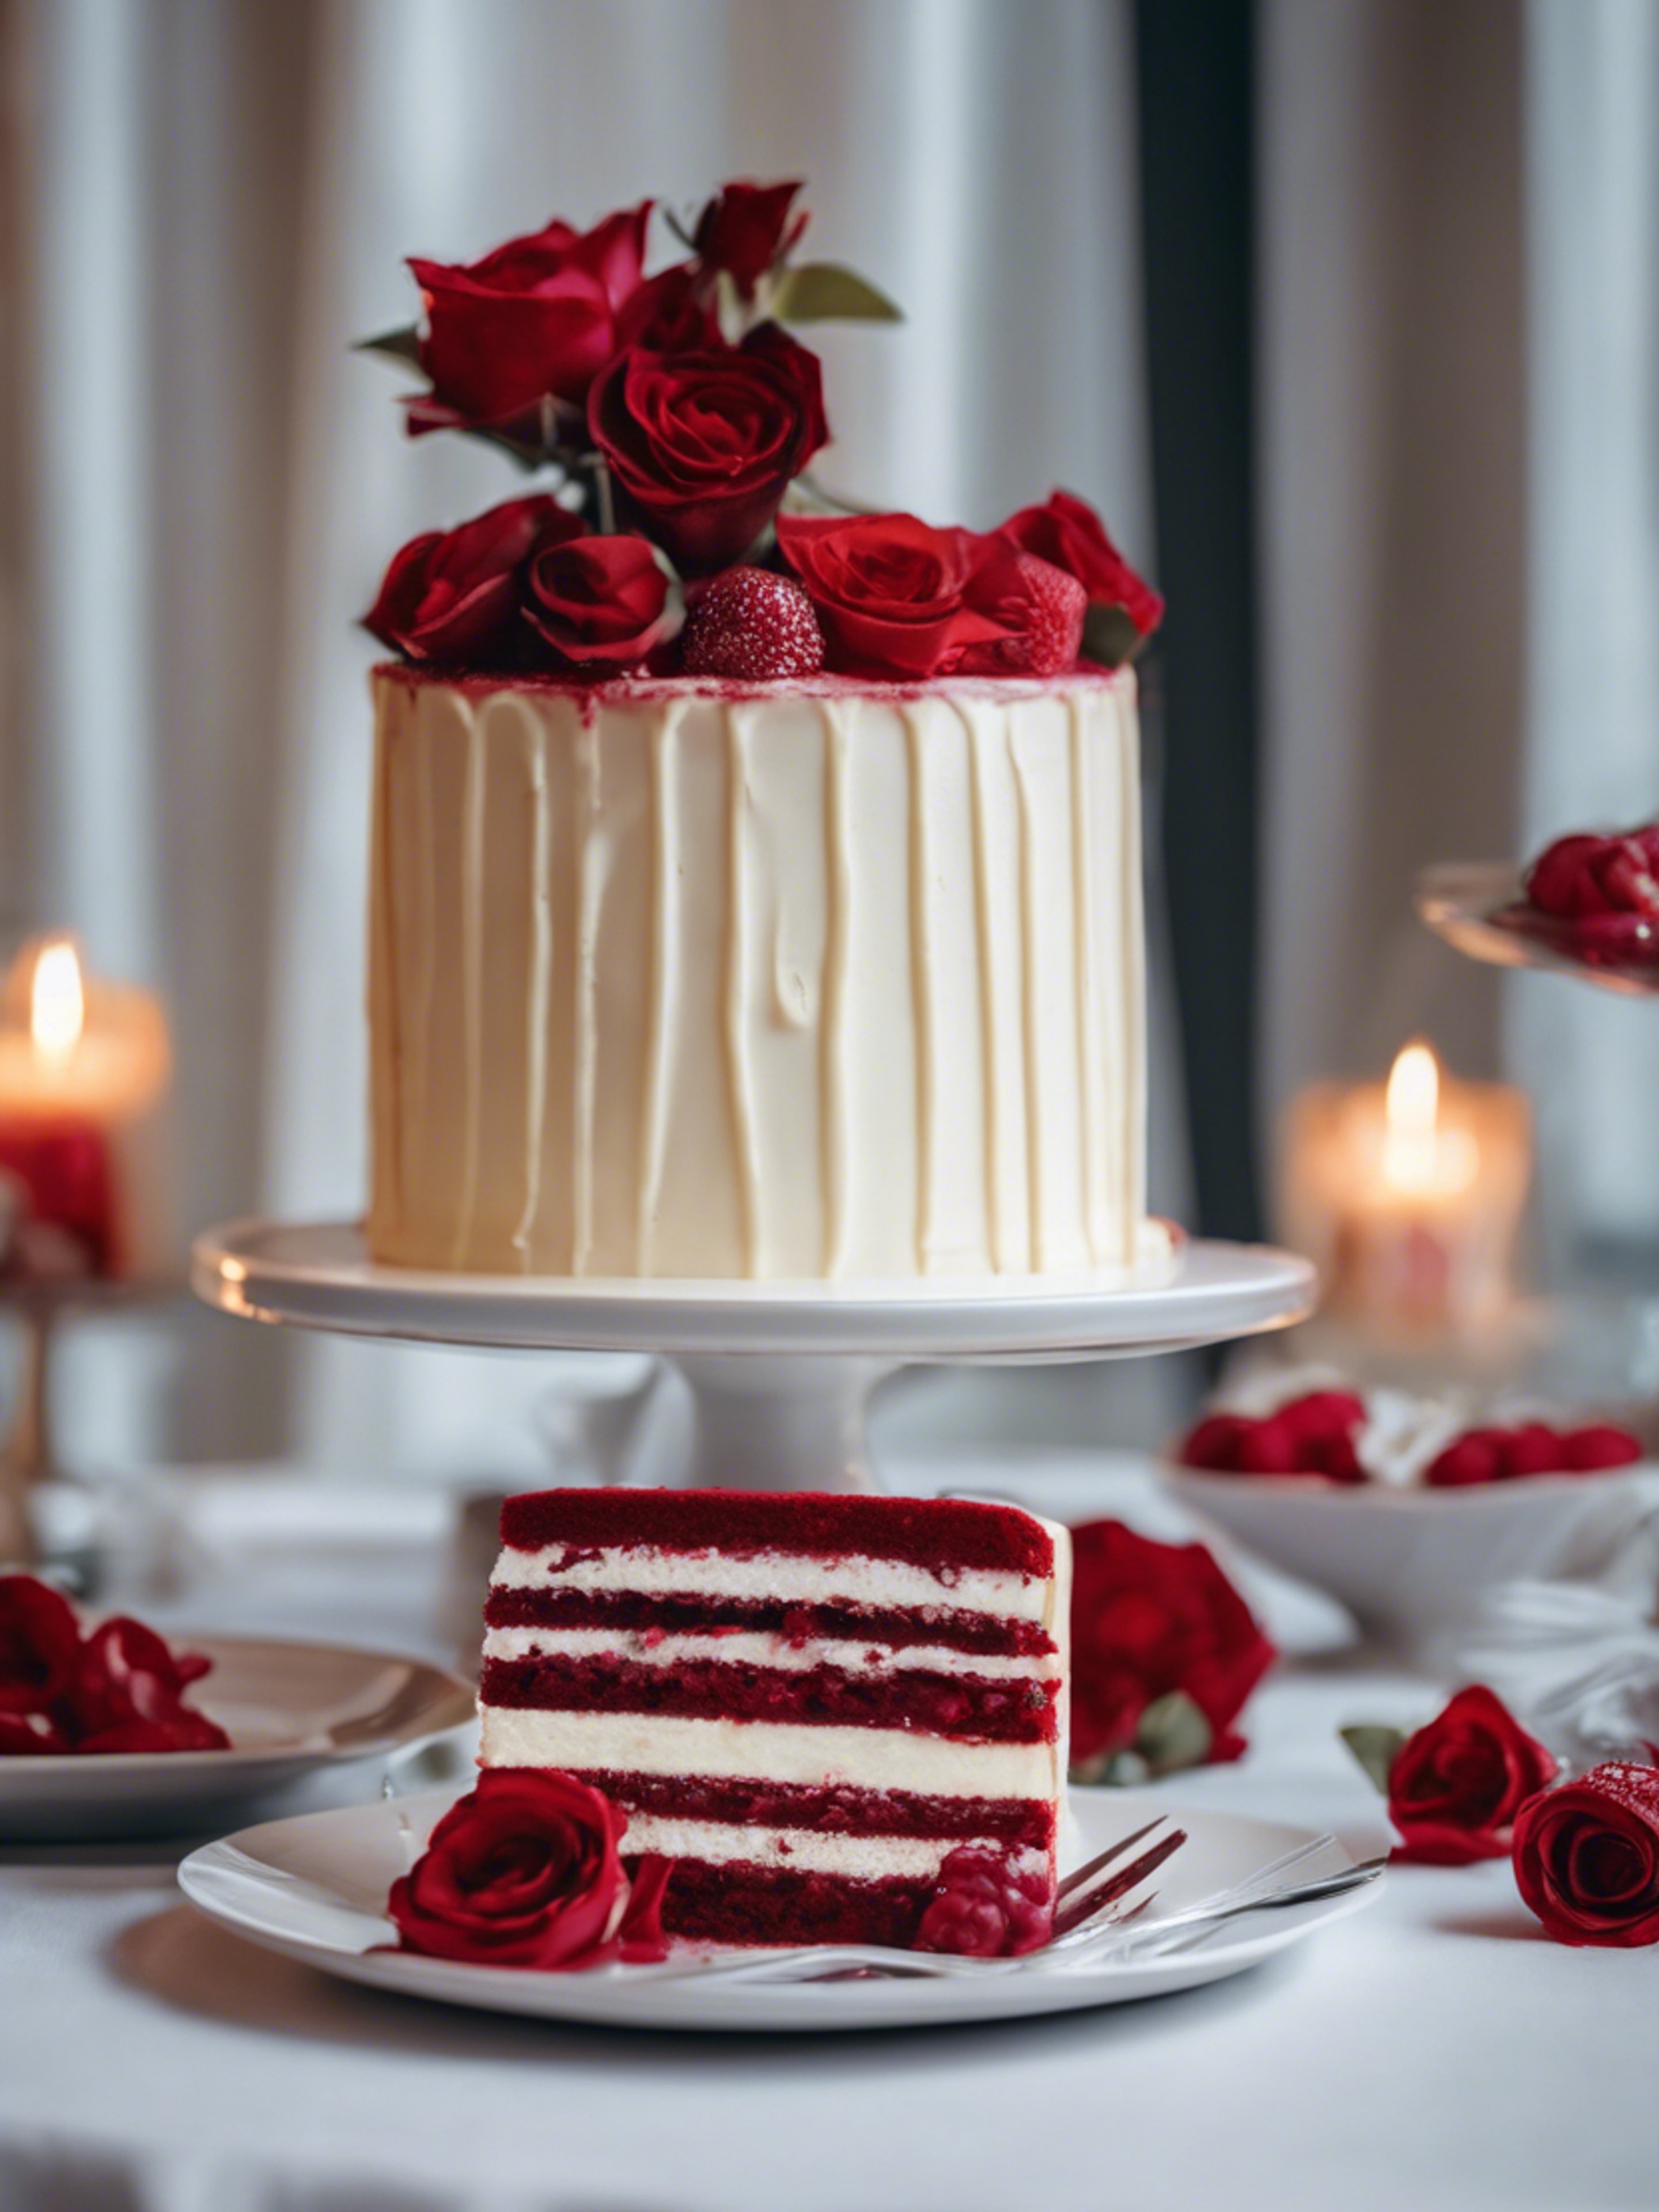 A scrumptious red velvet and white cream layered cake on a dessert table. Papel de parede[9c378ca78b014f2daafb]